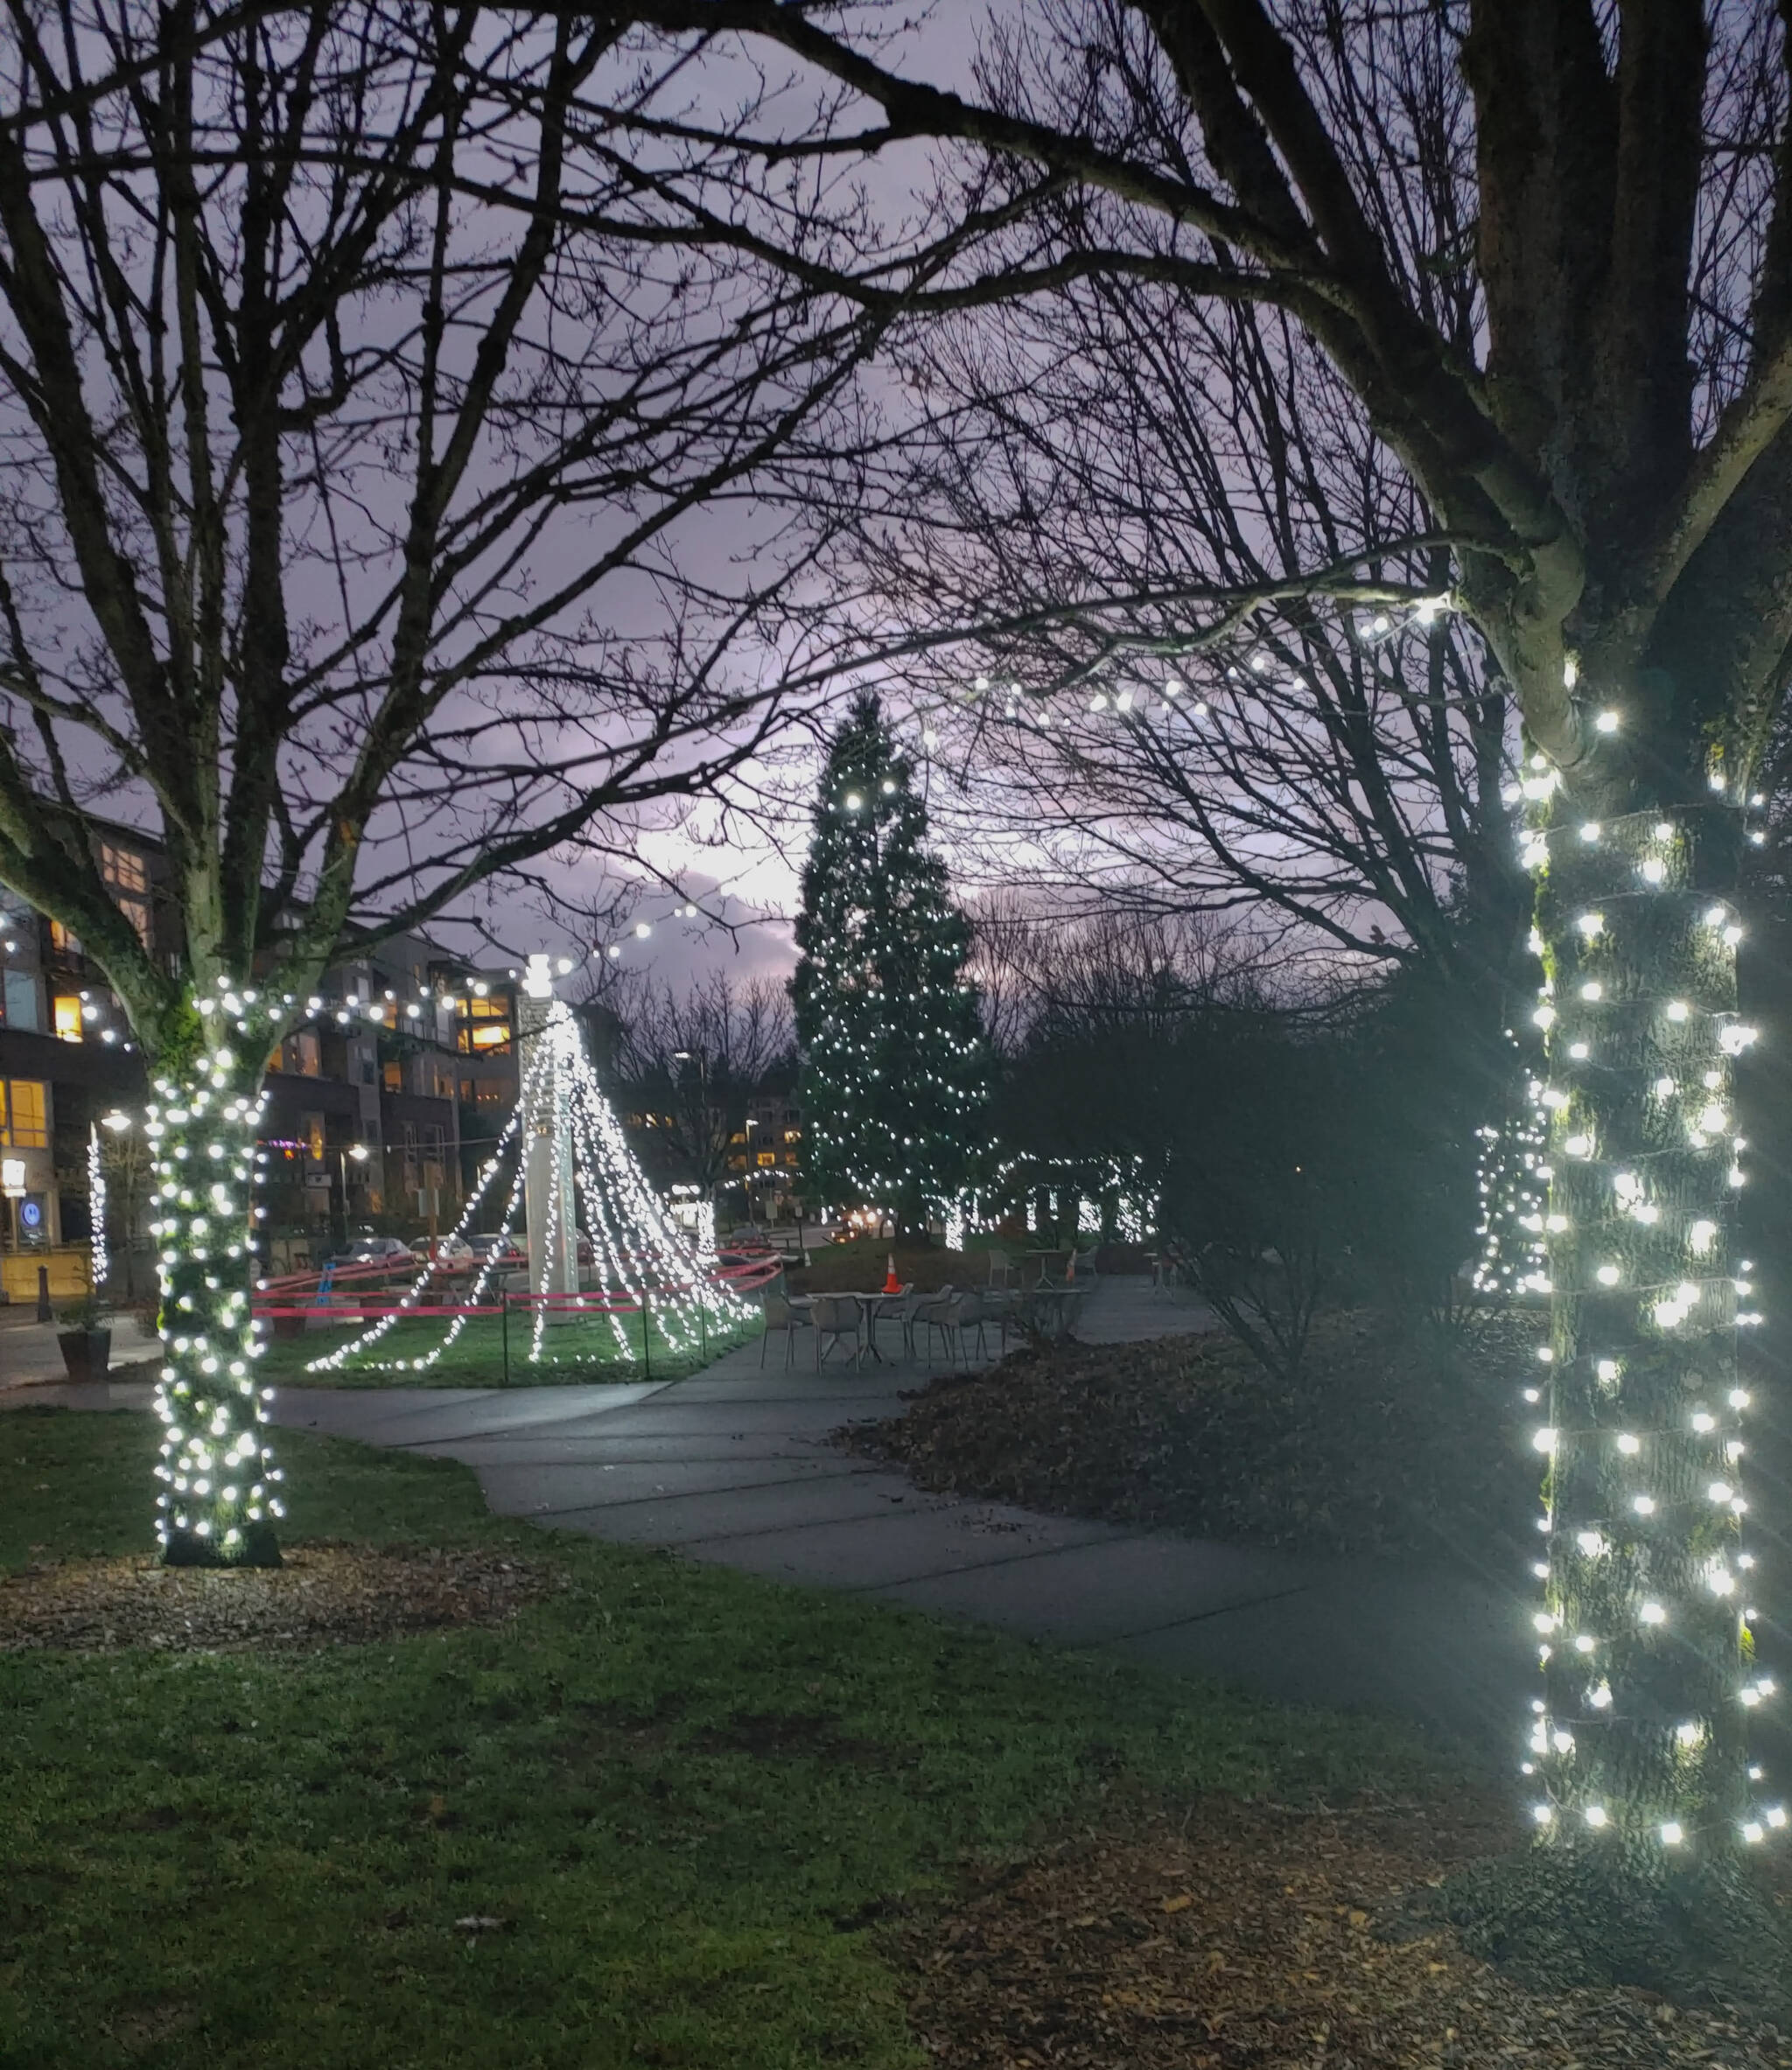 The Outdoor Sculpture Gallery features festive lights as part of Illuminate MI 2021. Lights can also be found along 78th Avenue Southeast, in Mercerdale Park and at the Mercer Island Thrift Shop. Andy Nystrom/ staff photo